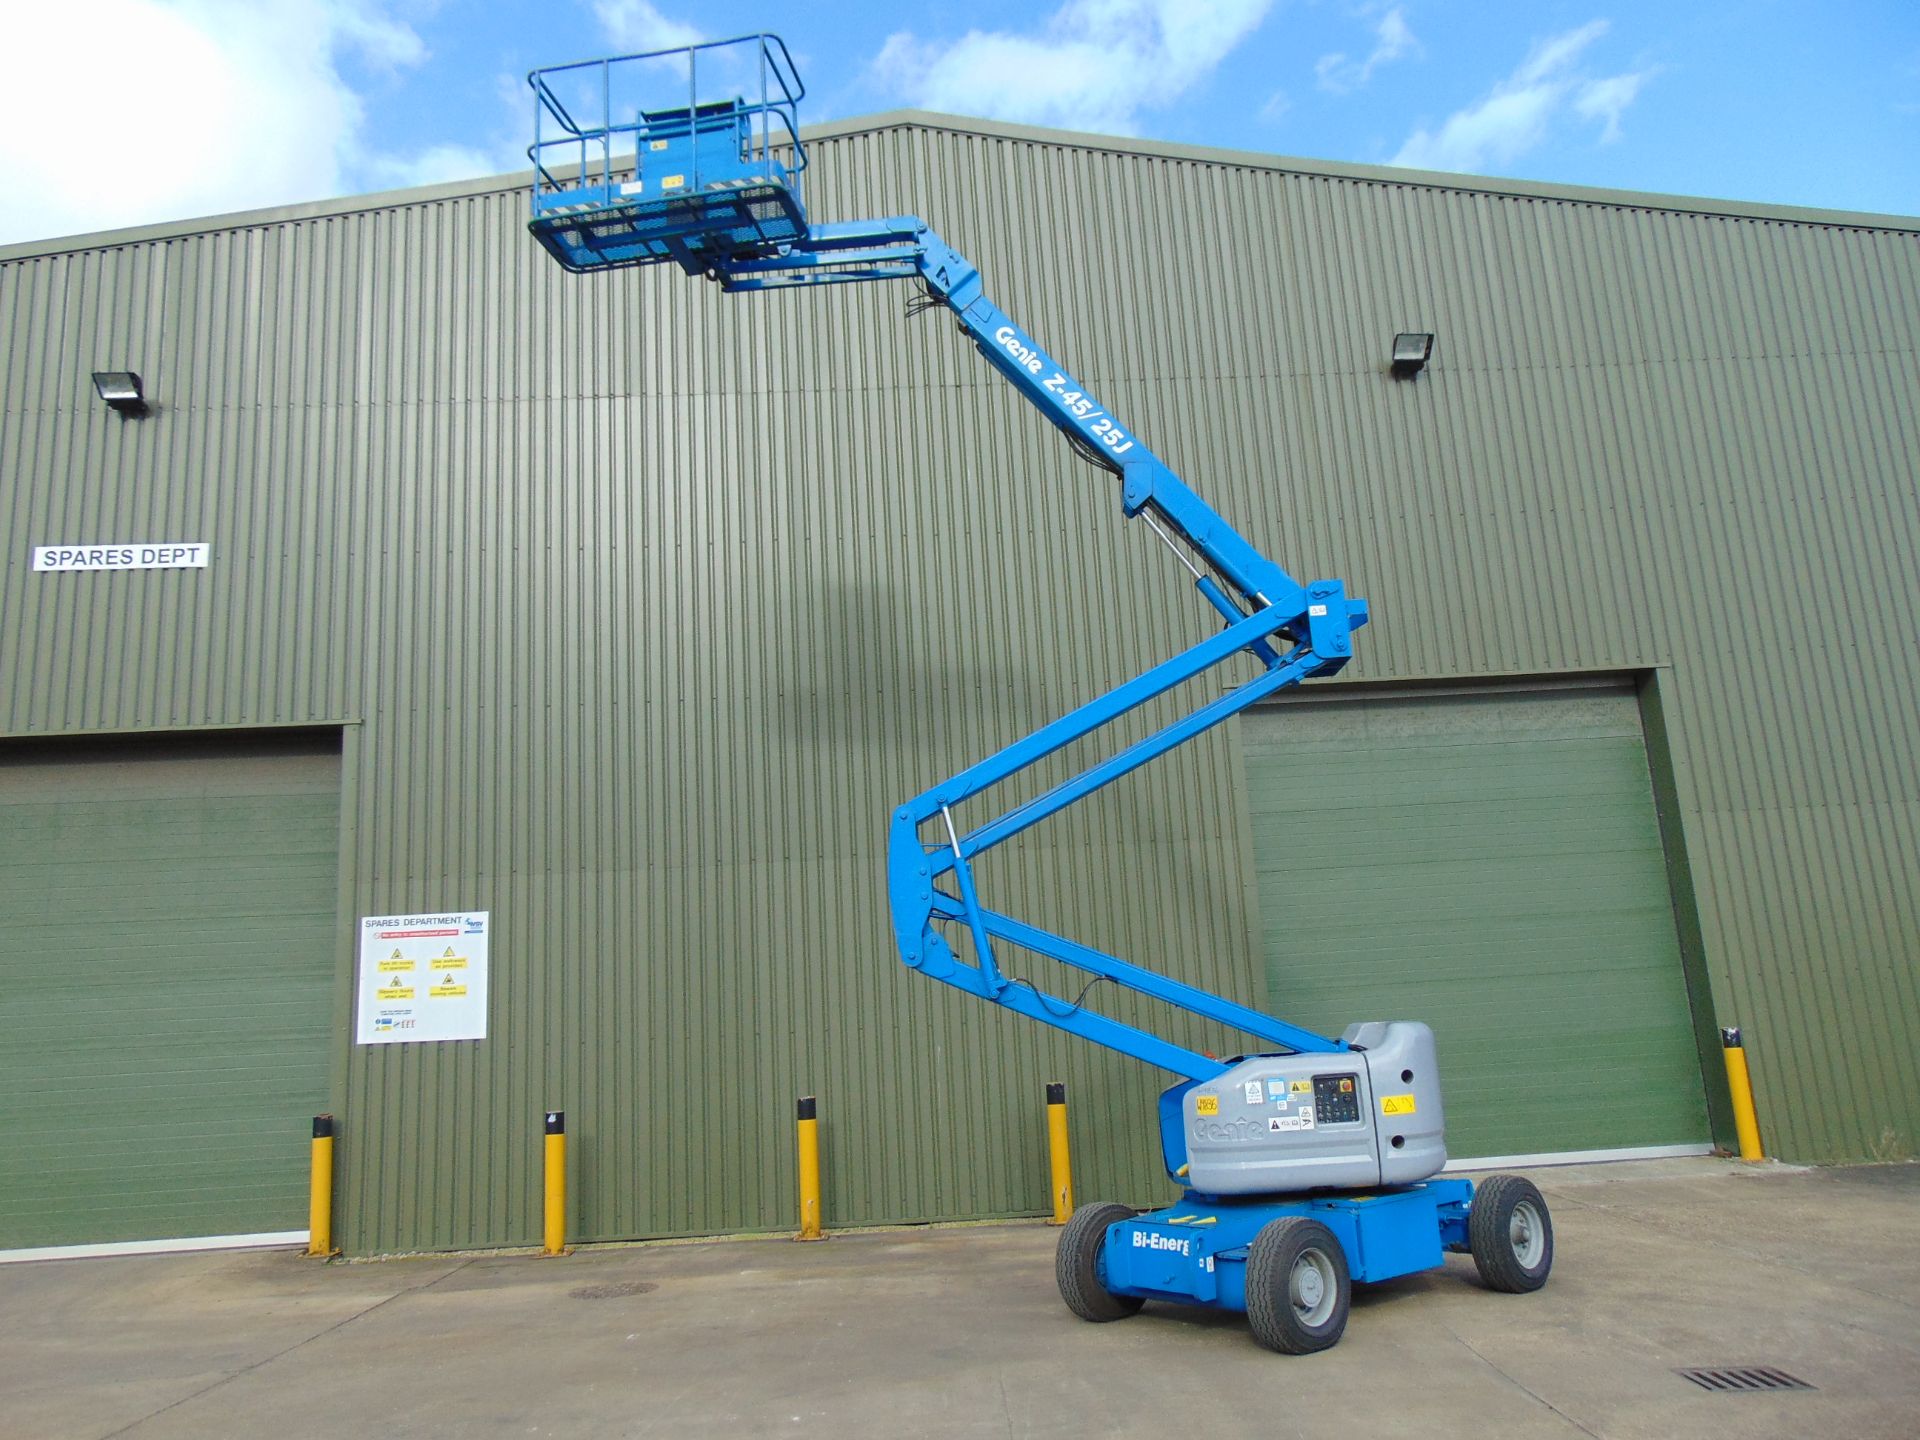 2005 Genie Z45-25J Diesel Articulated Boom Lift ONLY 775 HOURS - Image 3 of 24